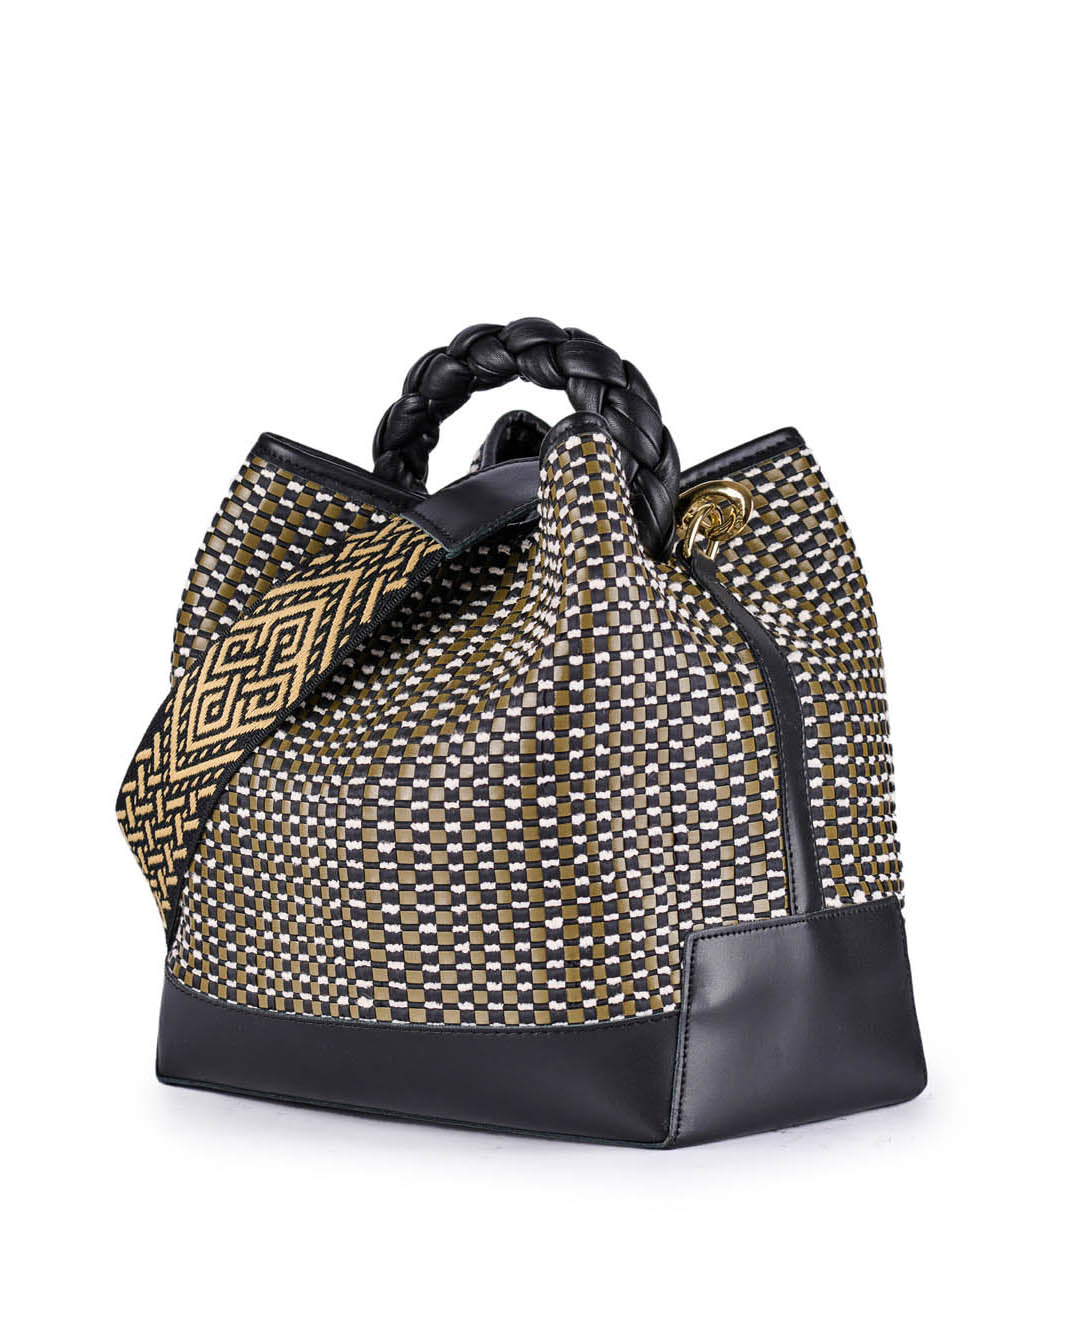 Stylish black and gold woven handbag with geometric pattern and braided handle